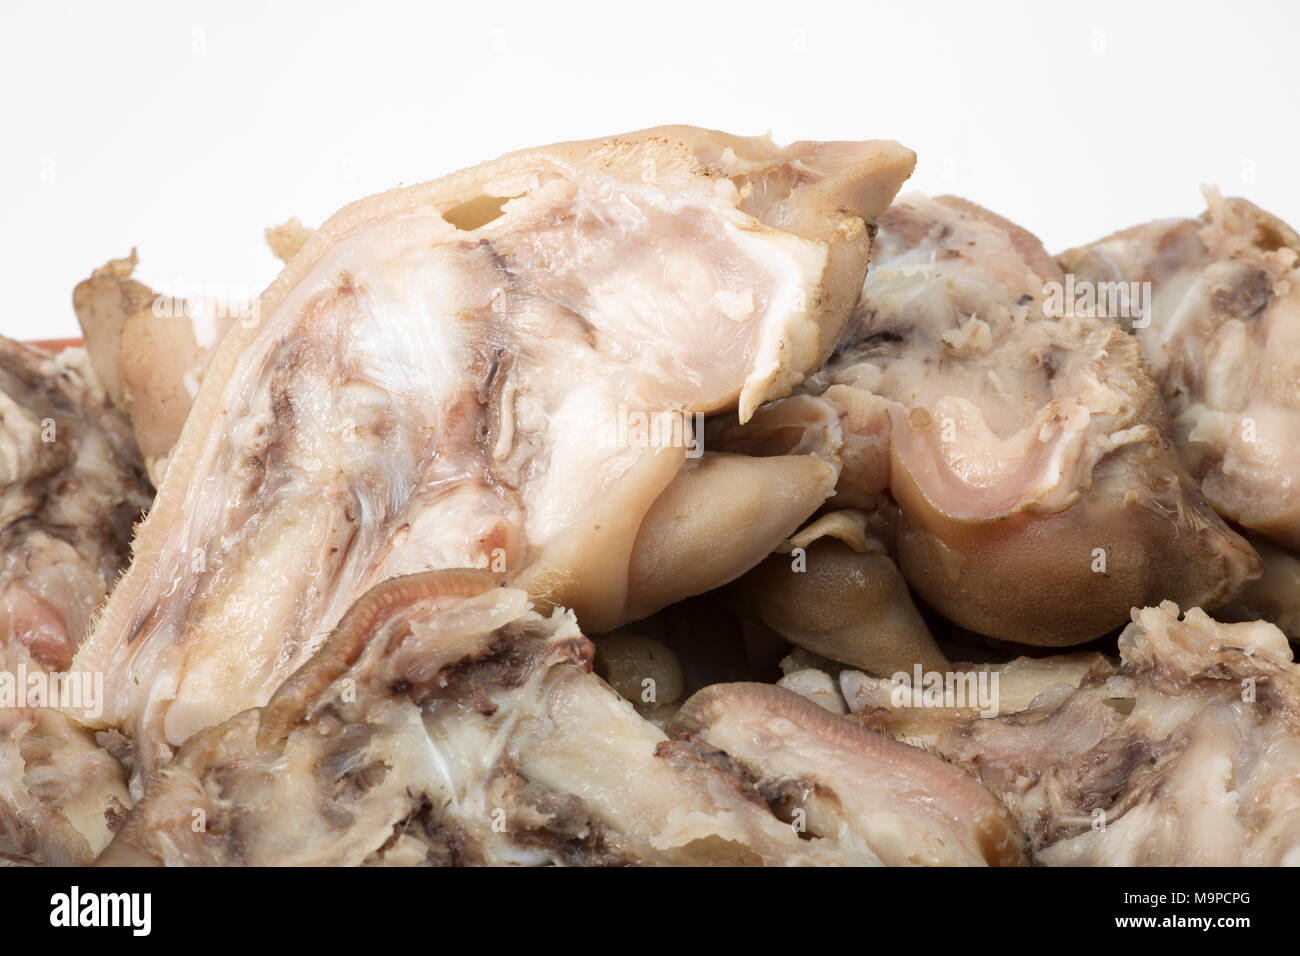 Pigs trotters that have been boiled until tender and split and left to cool before being eaten with a splash of vinegar UK. Pigs trotters are rich in Stock Photo